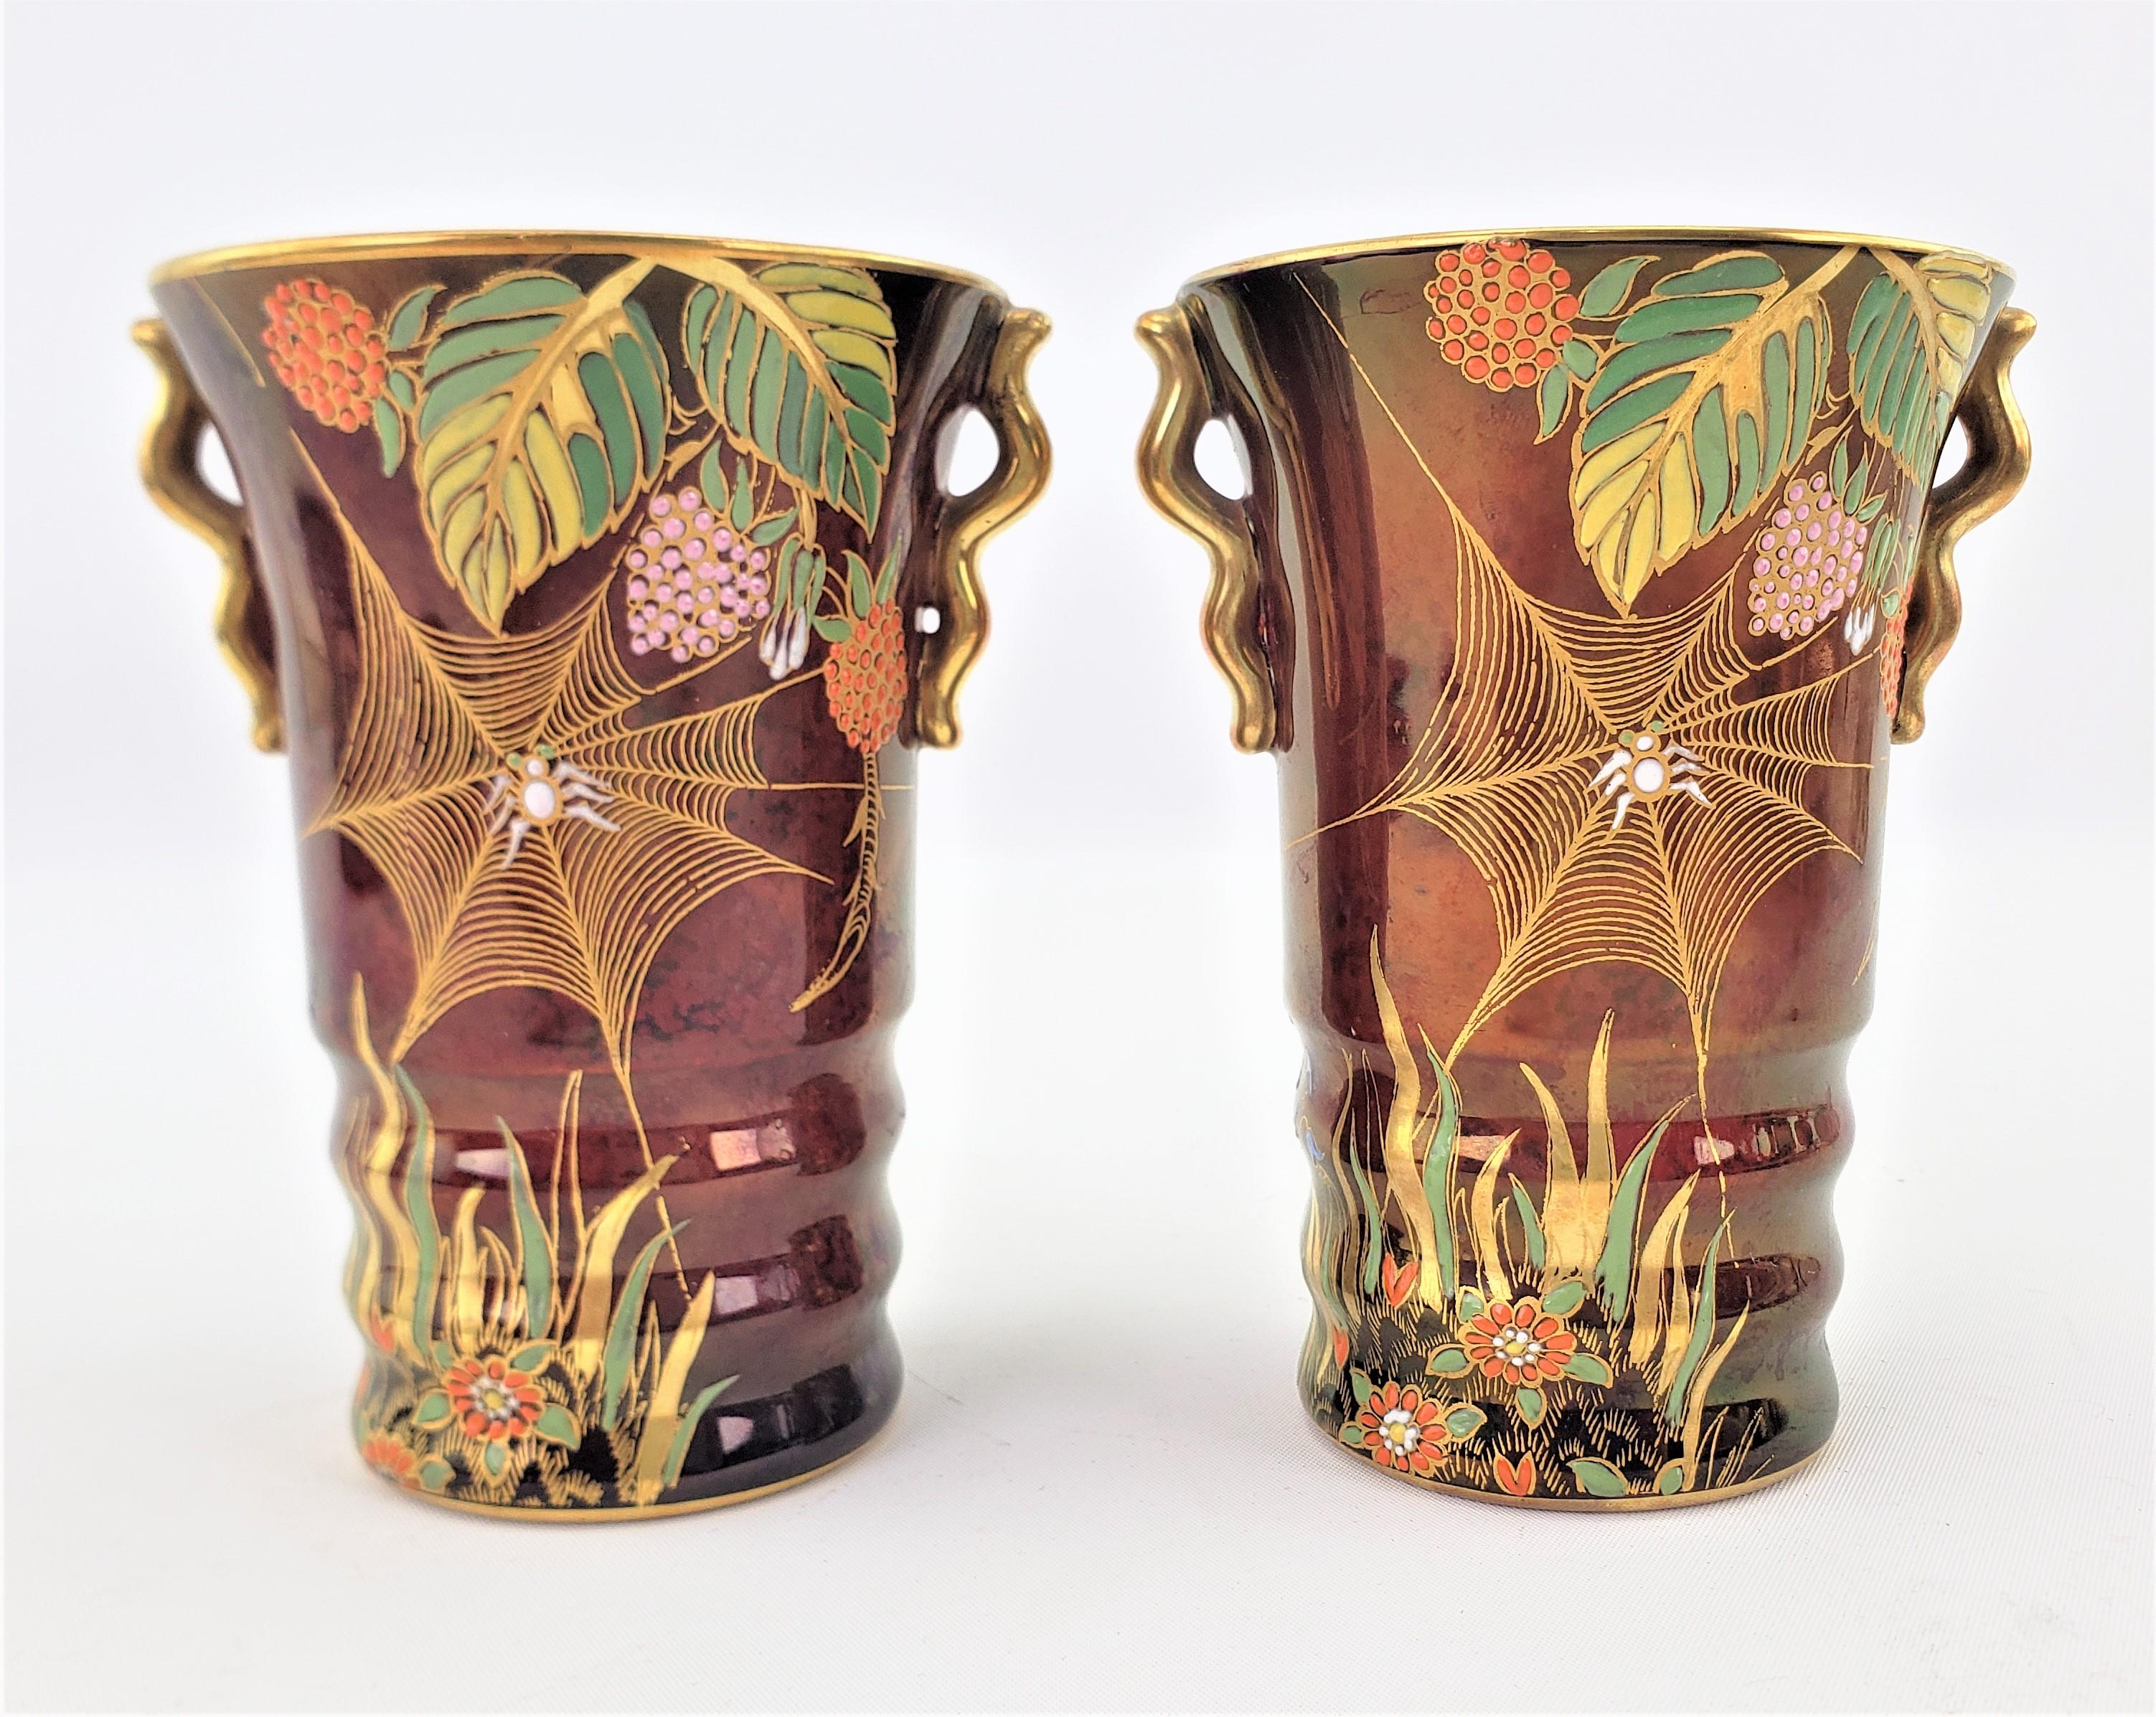 This pair of Art Deco porcelain and ornately hand-painted vases were made by the well known Carlton Ware factory of England, in approximately 1920 in a period Art Deco style. The vases are done in their line of Rouge Royale with a deep red ground